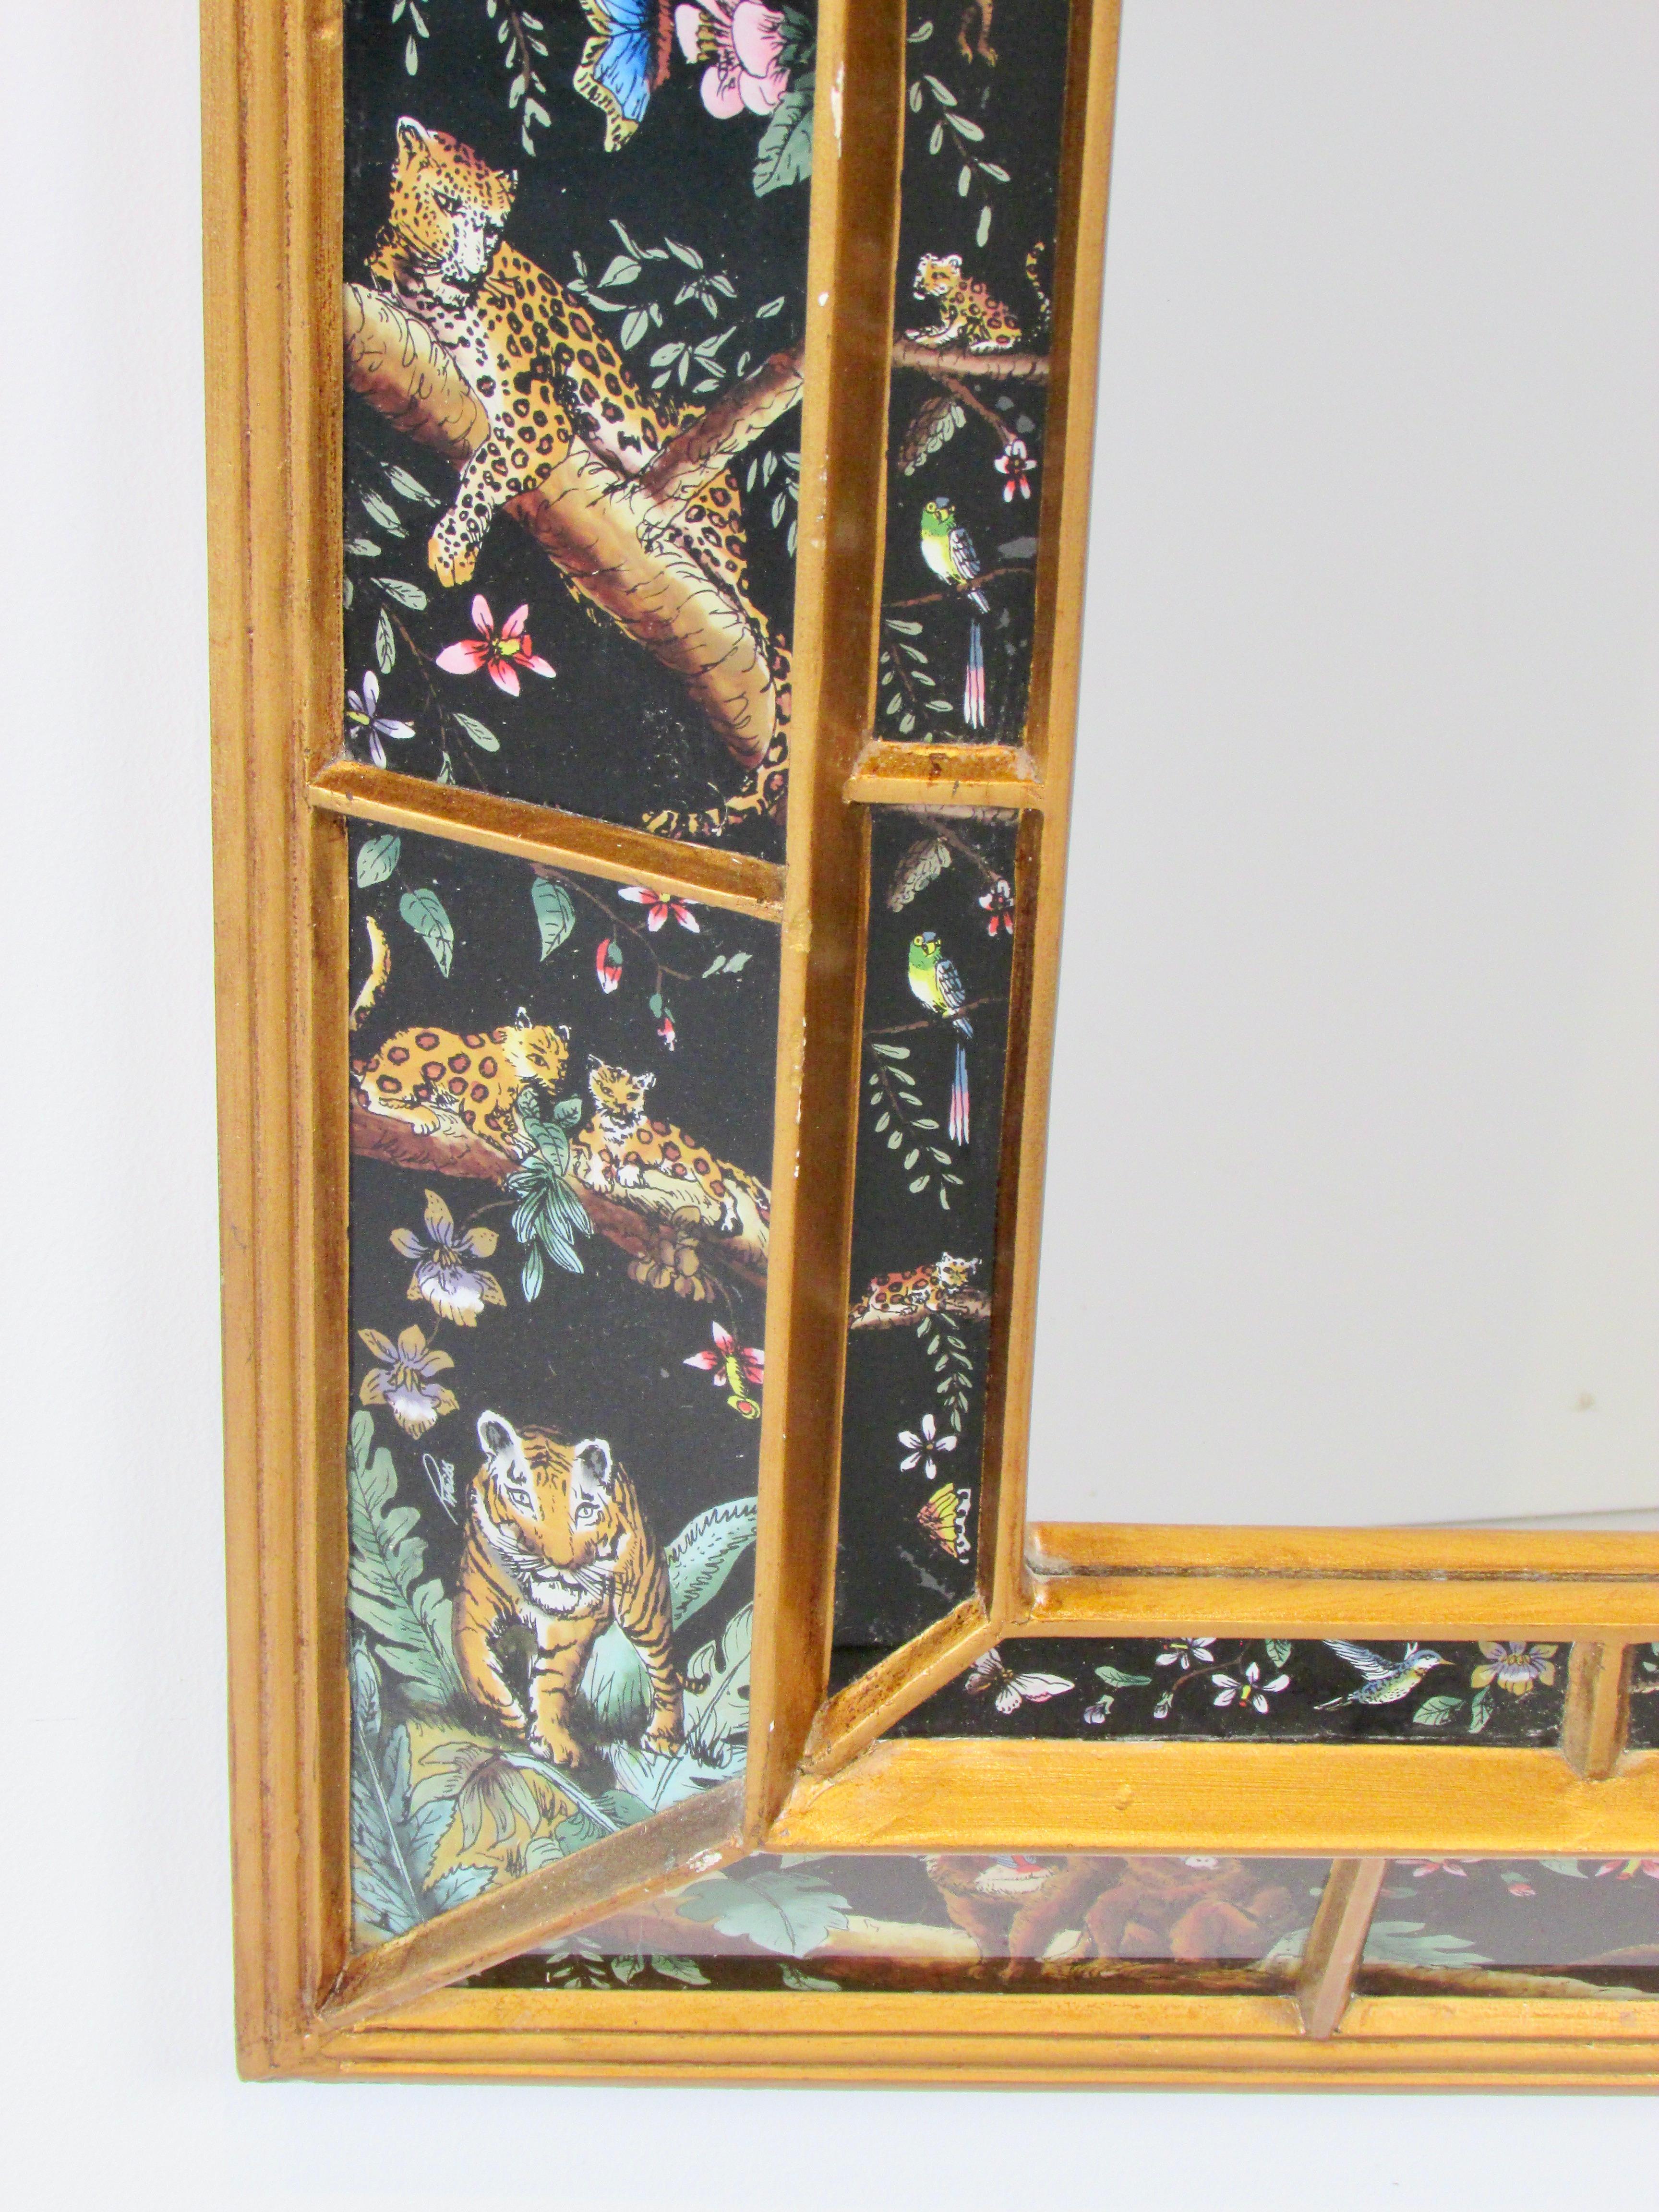 Peruvian Wall Mirror with Vivid Exotic Panther Tiger Monkey Birds Butterfly Images